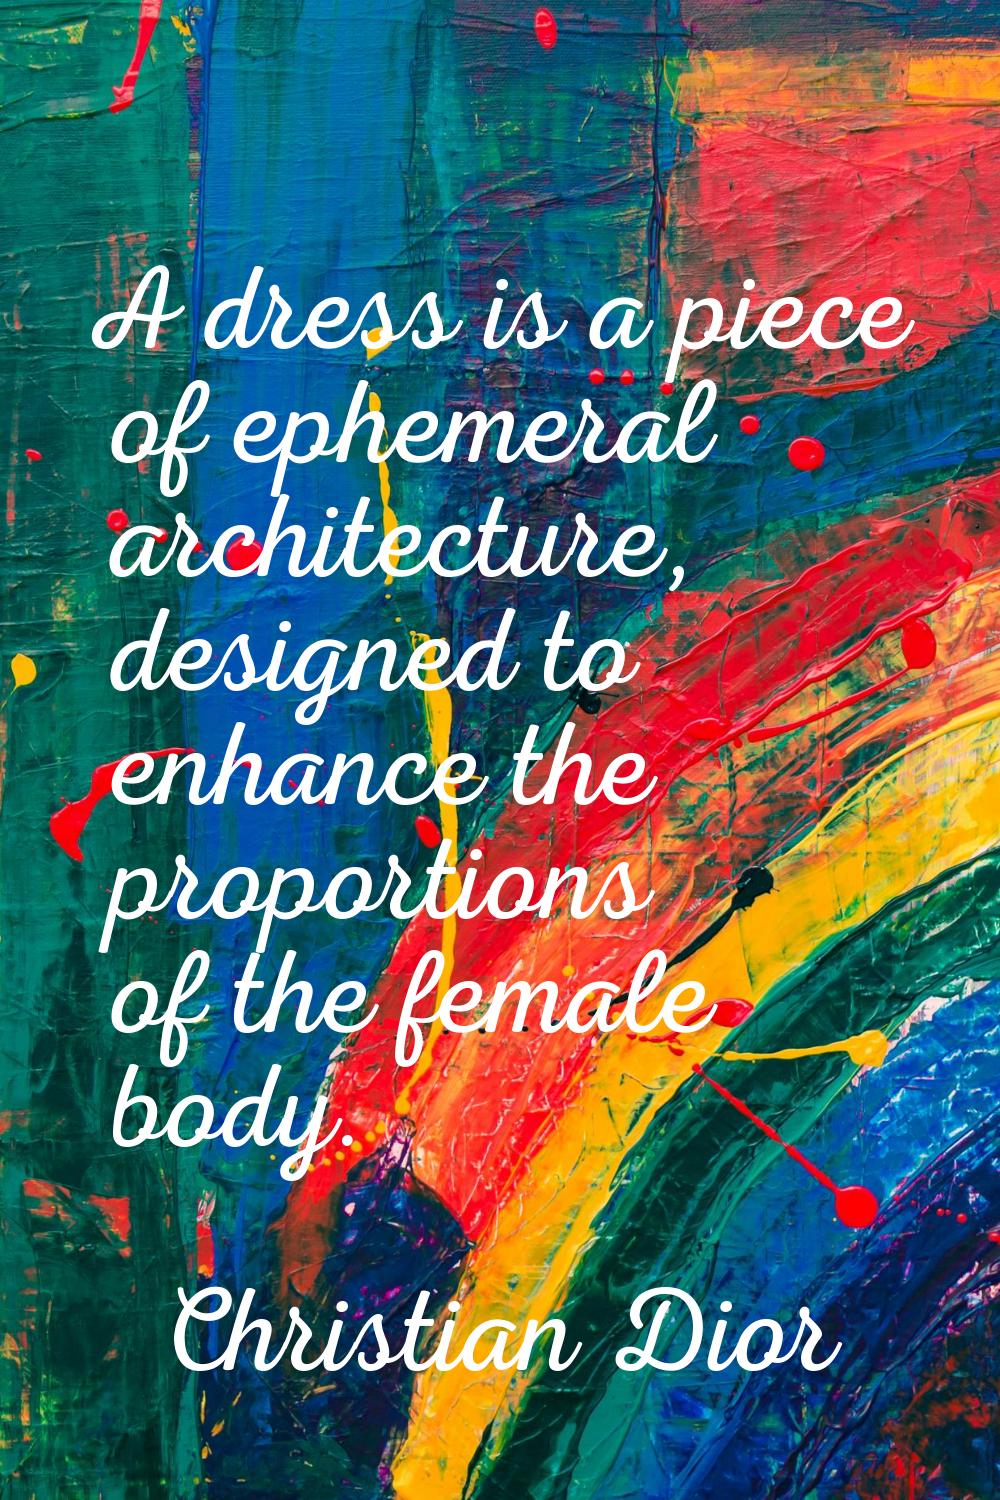 A dress is a piece of ephemeral architecture, designed to enhance the proportions of the female bod